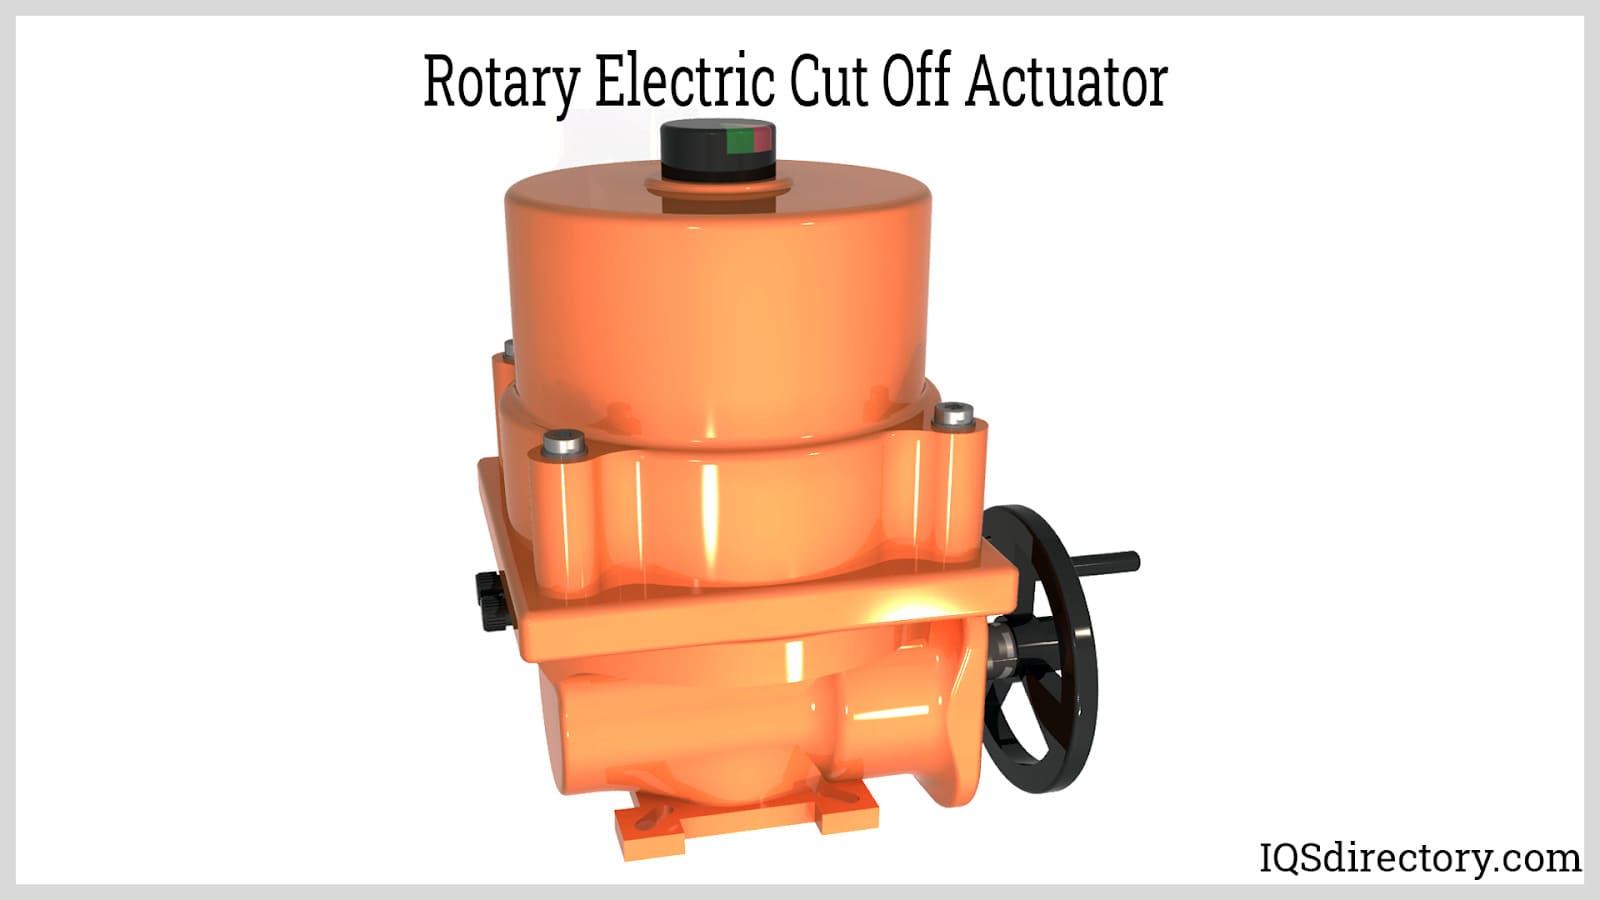 Rotary Electric Cut Off Actuator